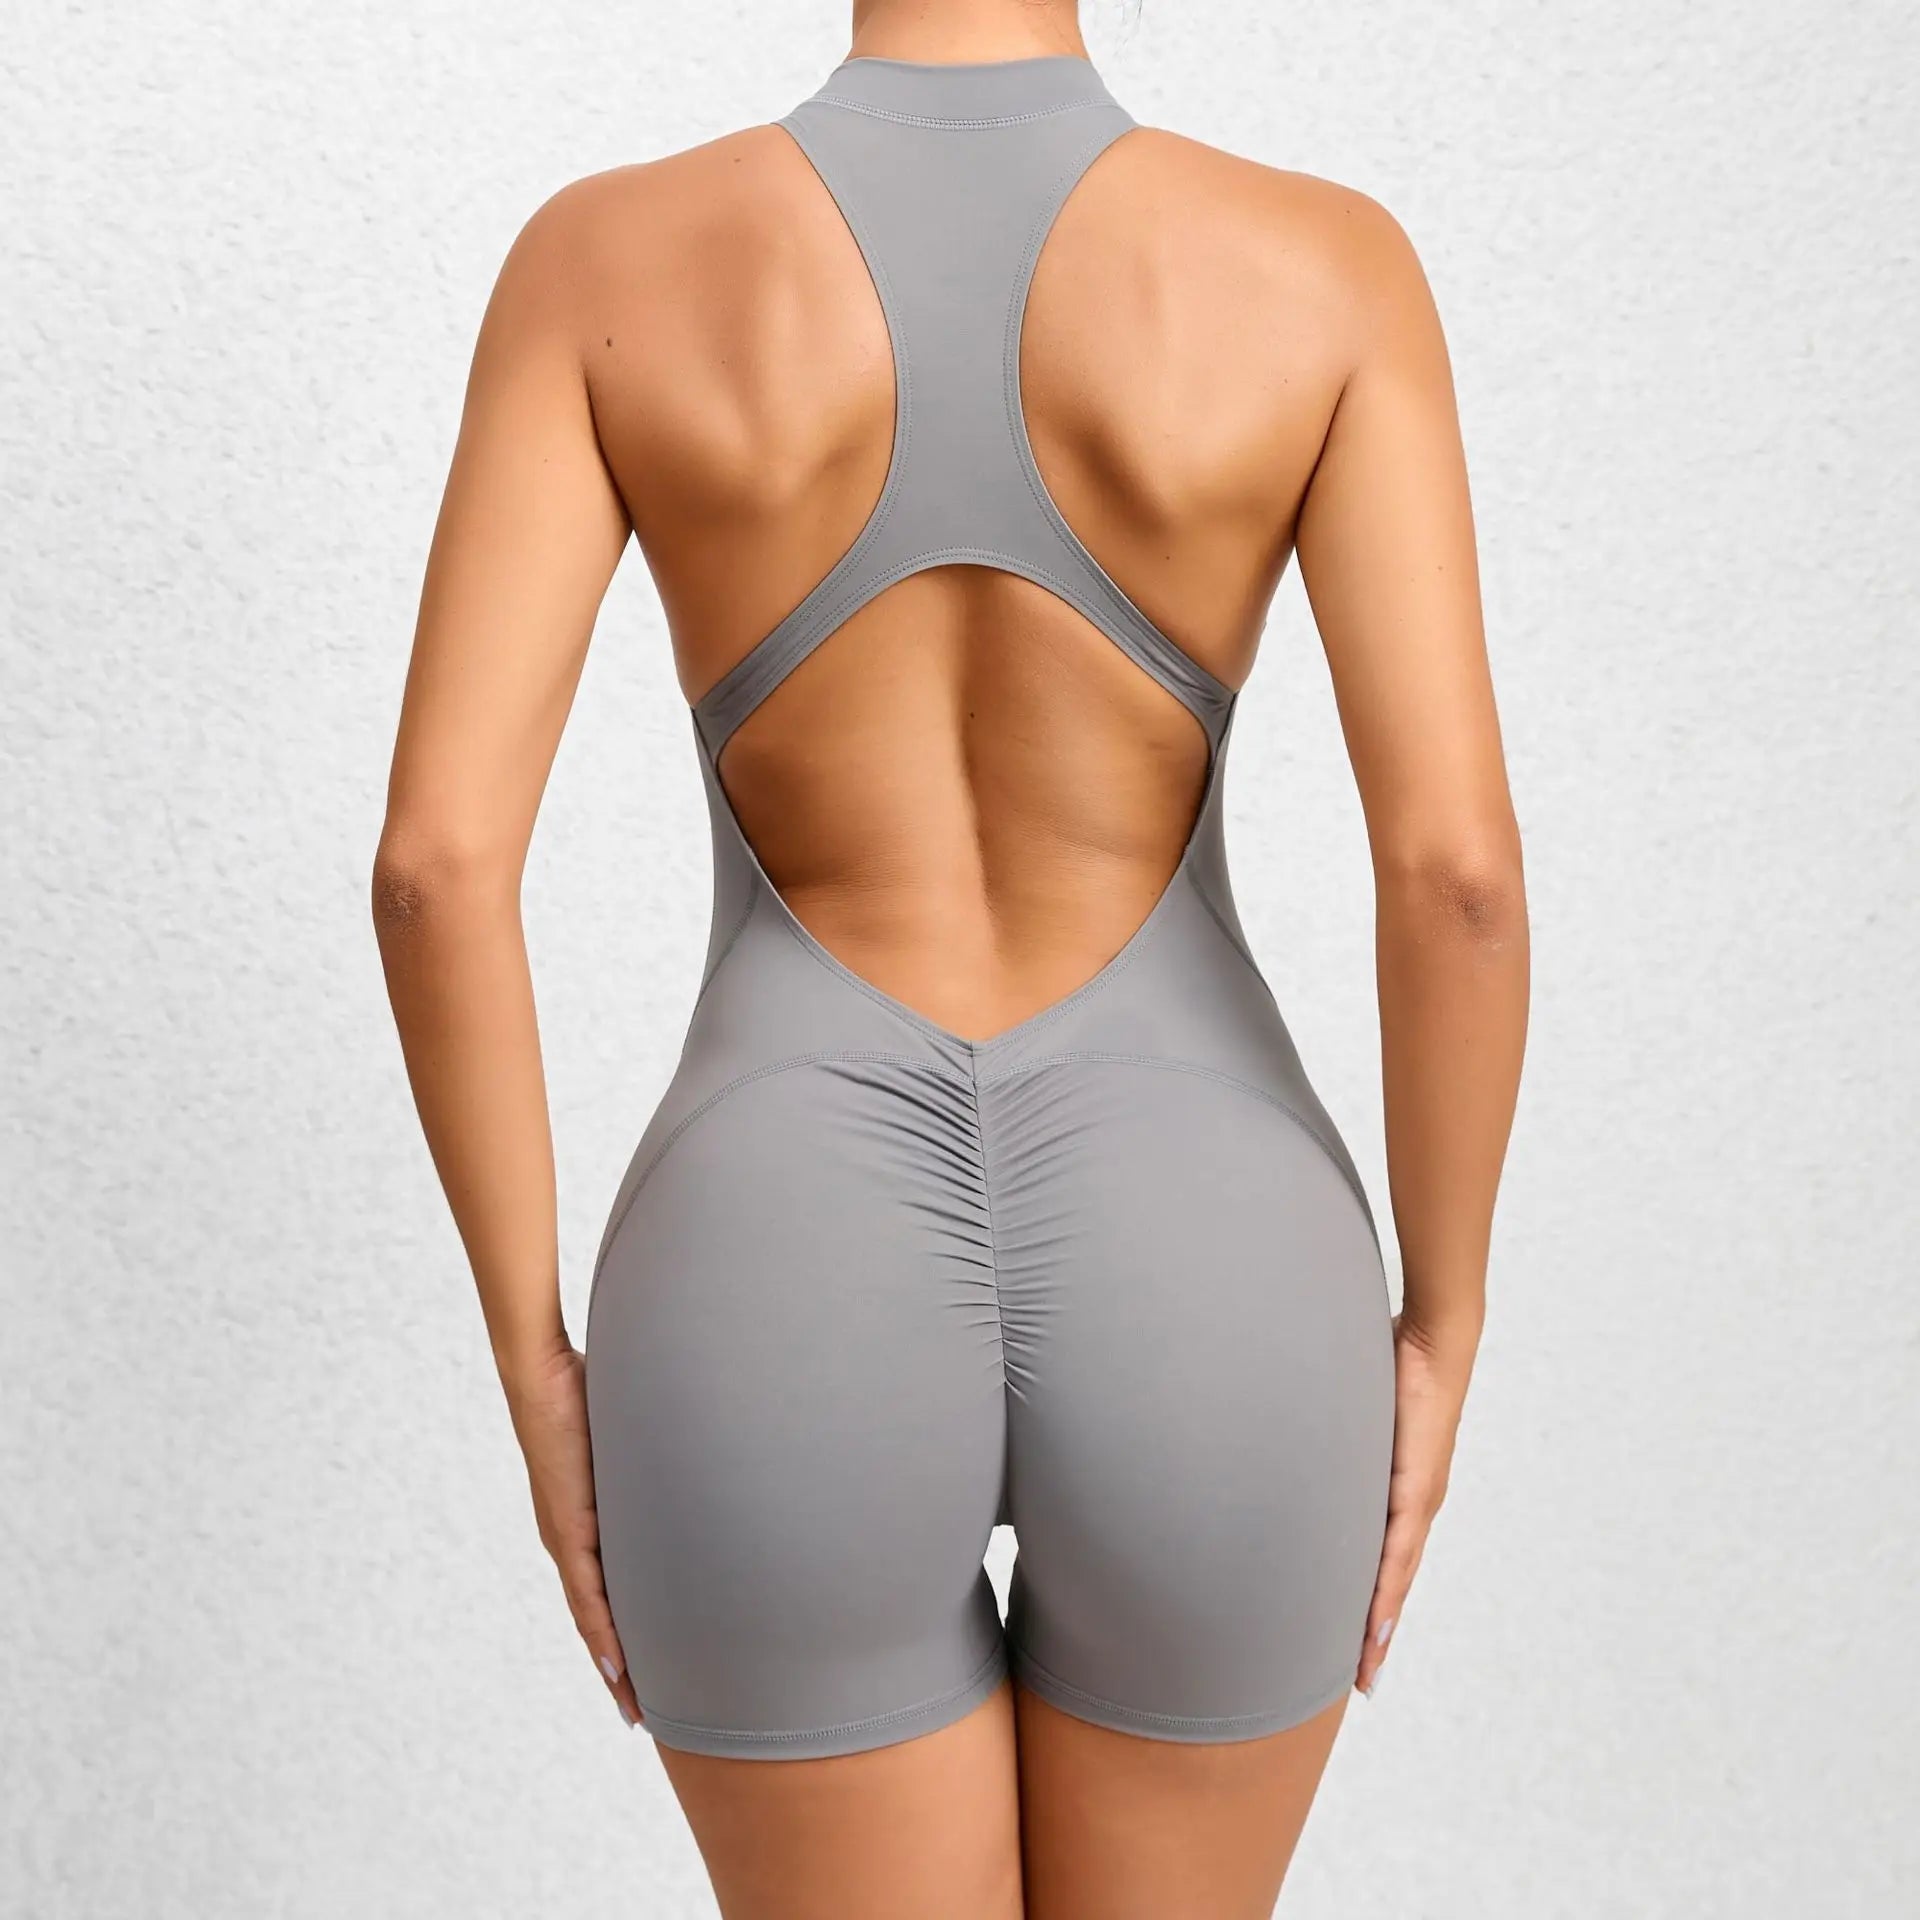 Zipper Sporty Jumpsuit Woman Lycra Short Fitness Gym Overalls 2023 New Workout Clothes for Women Sport Set Yoga Clothing Blue Alpha C Apparel gray / S